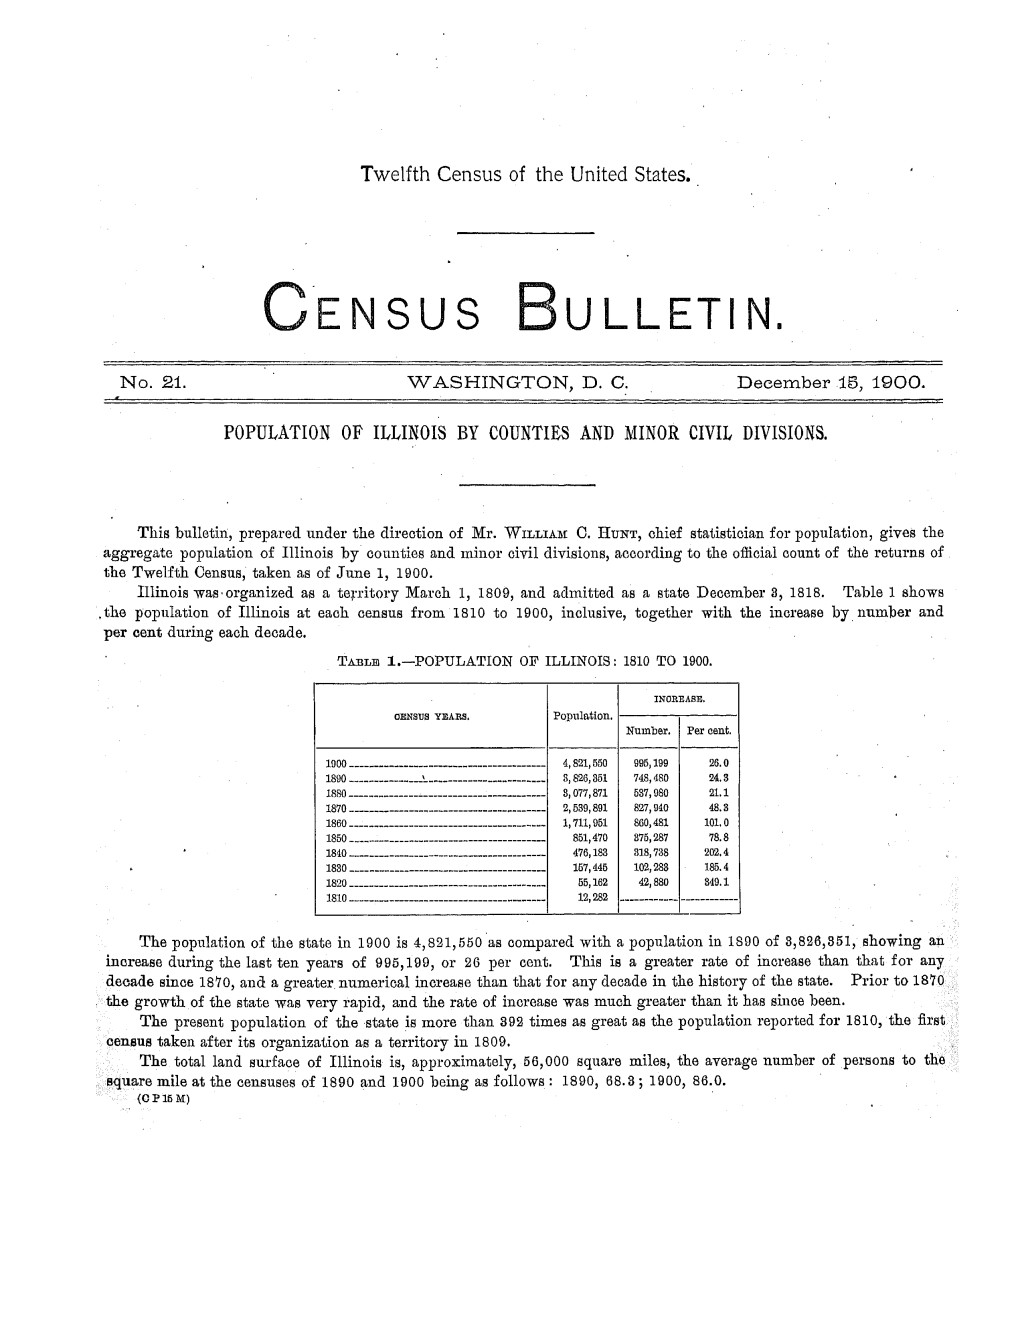 Bulletin 21. Population of Illinois by Counties and Minor Civil Divisions